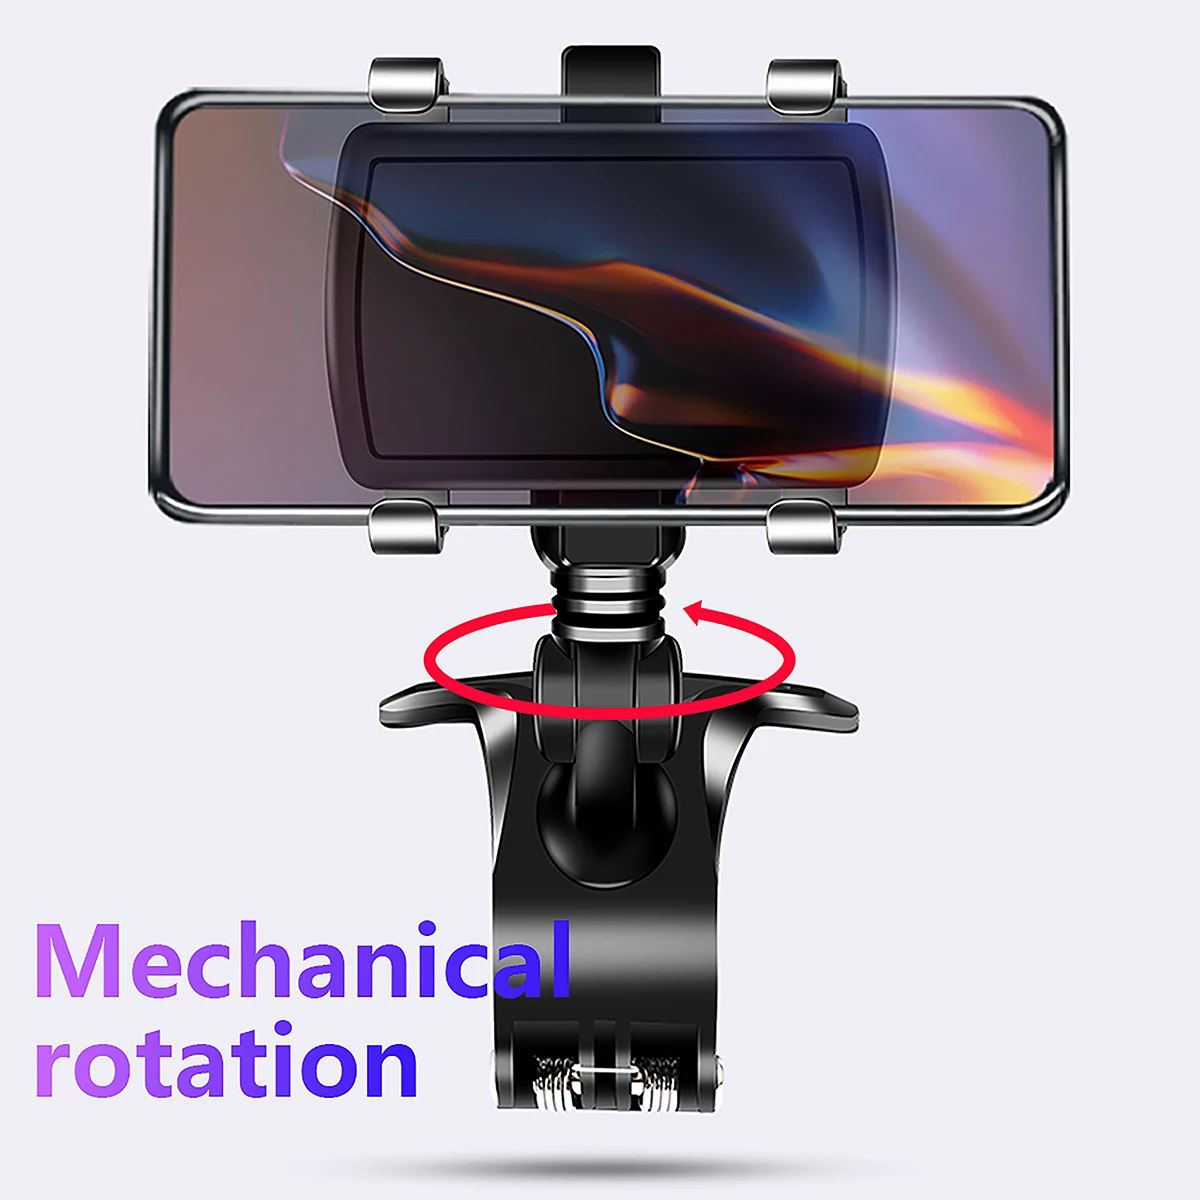 fonken upgraded cellphone holder 1400 degree rotating car phone holder gps stand dashboard clips for iphone 12 11 xiaomi holder free global shipping